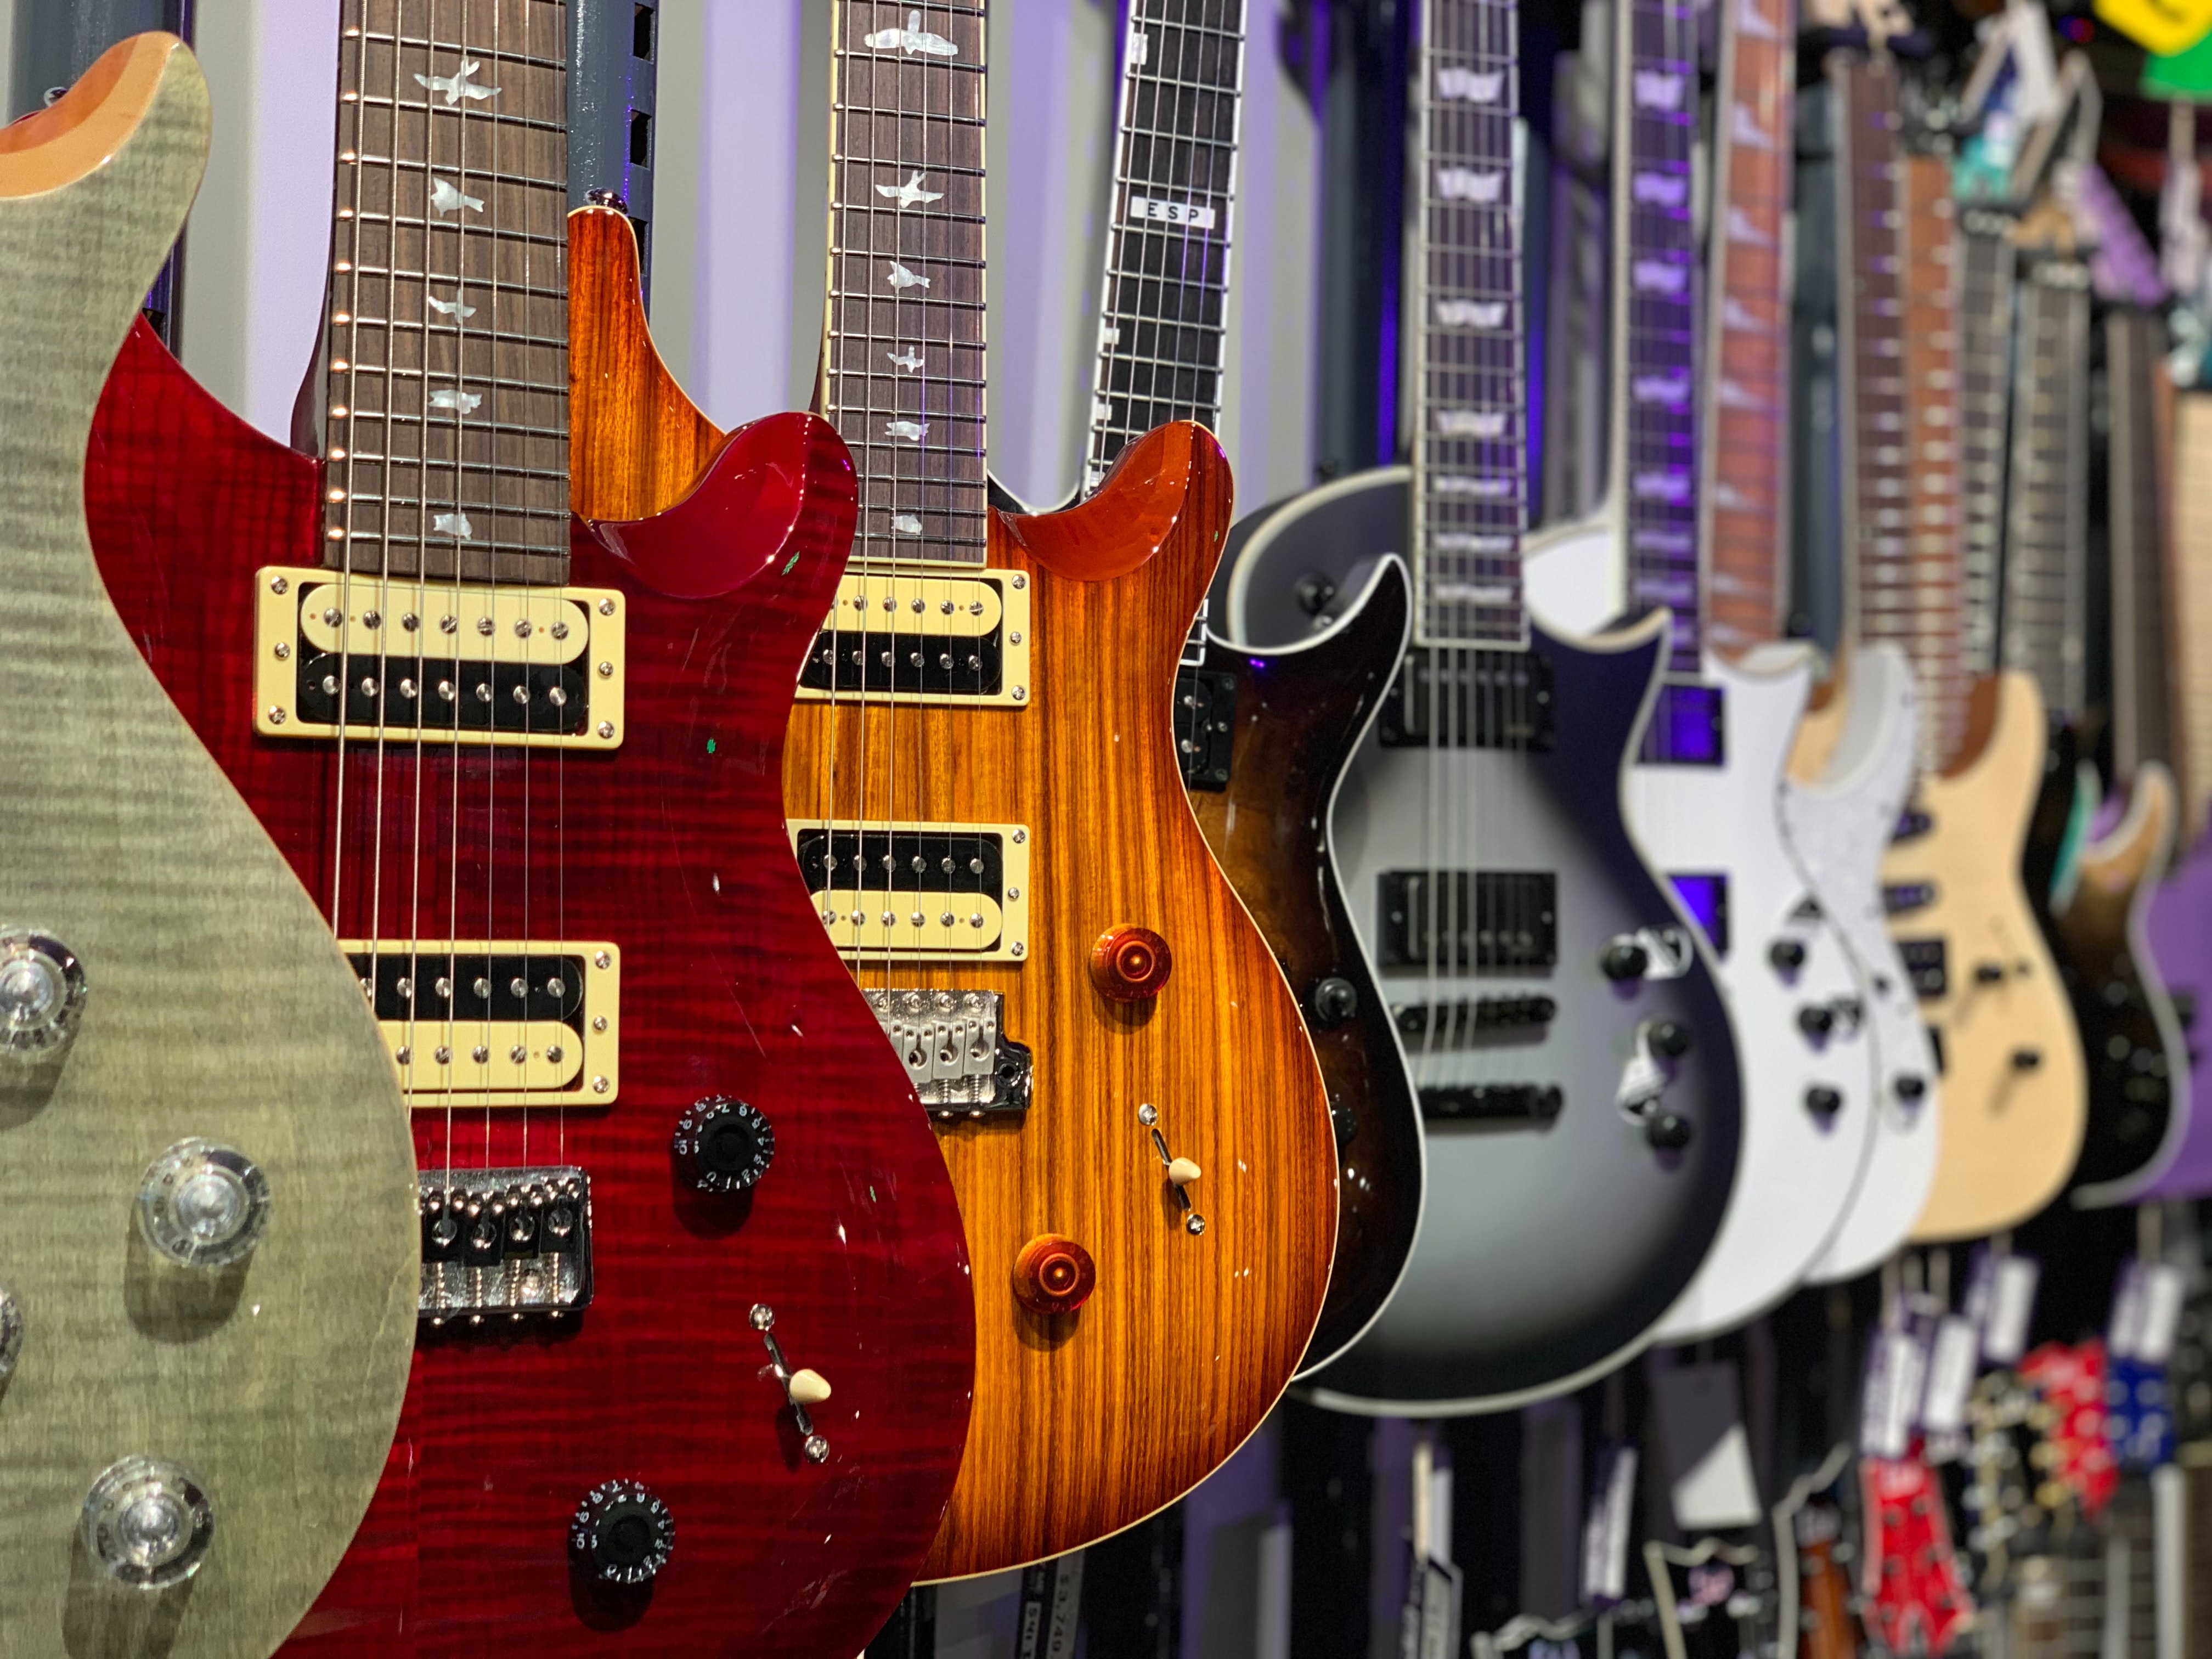 Electric guitars with varying finishes hanging from wall. These are some gorgeous guitars that sport both looks and tone!